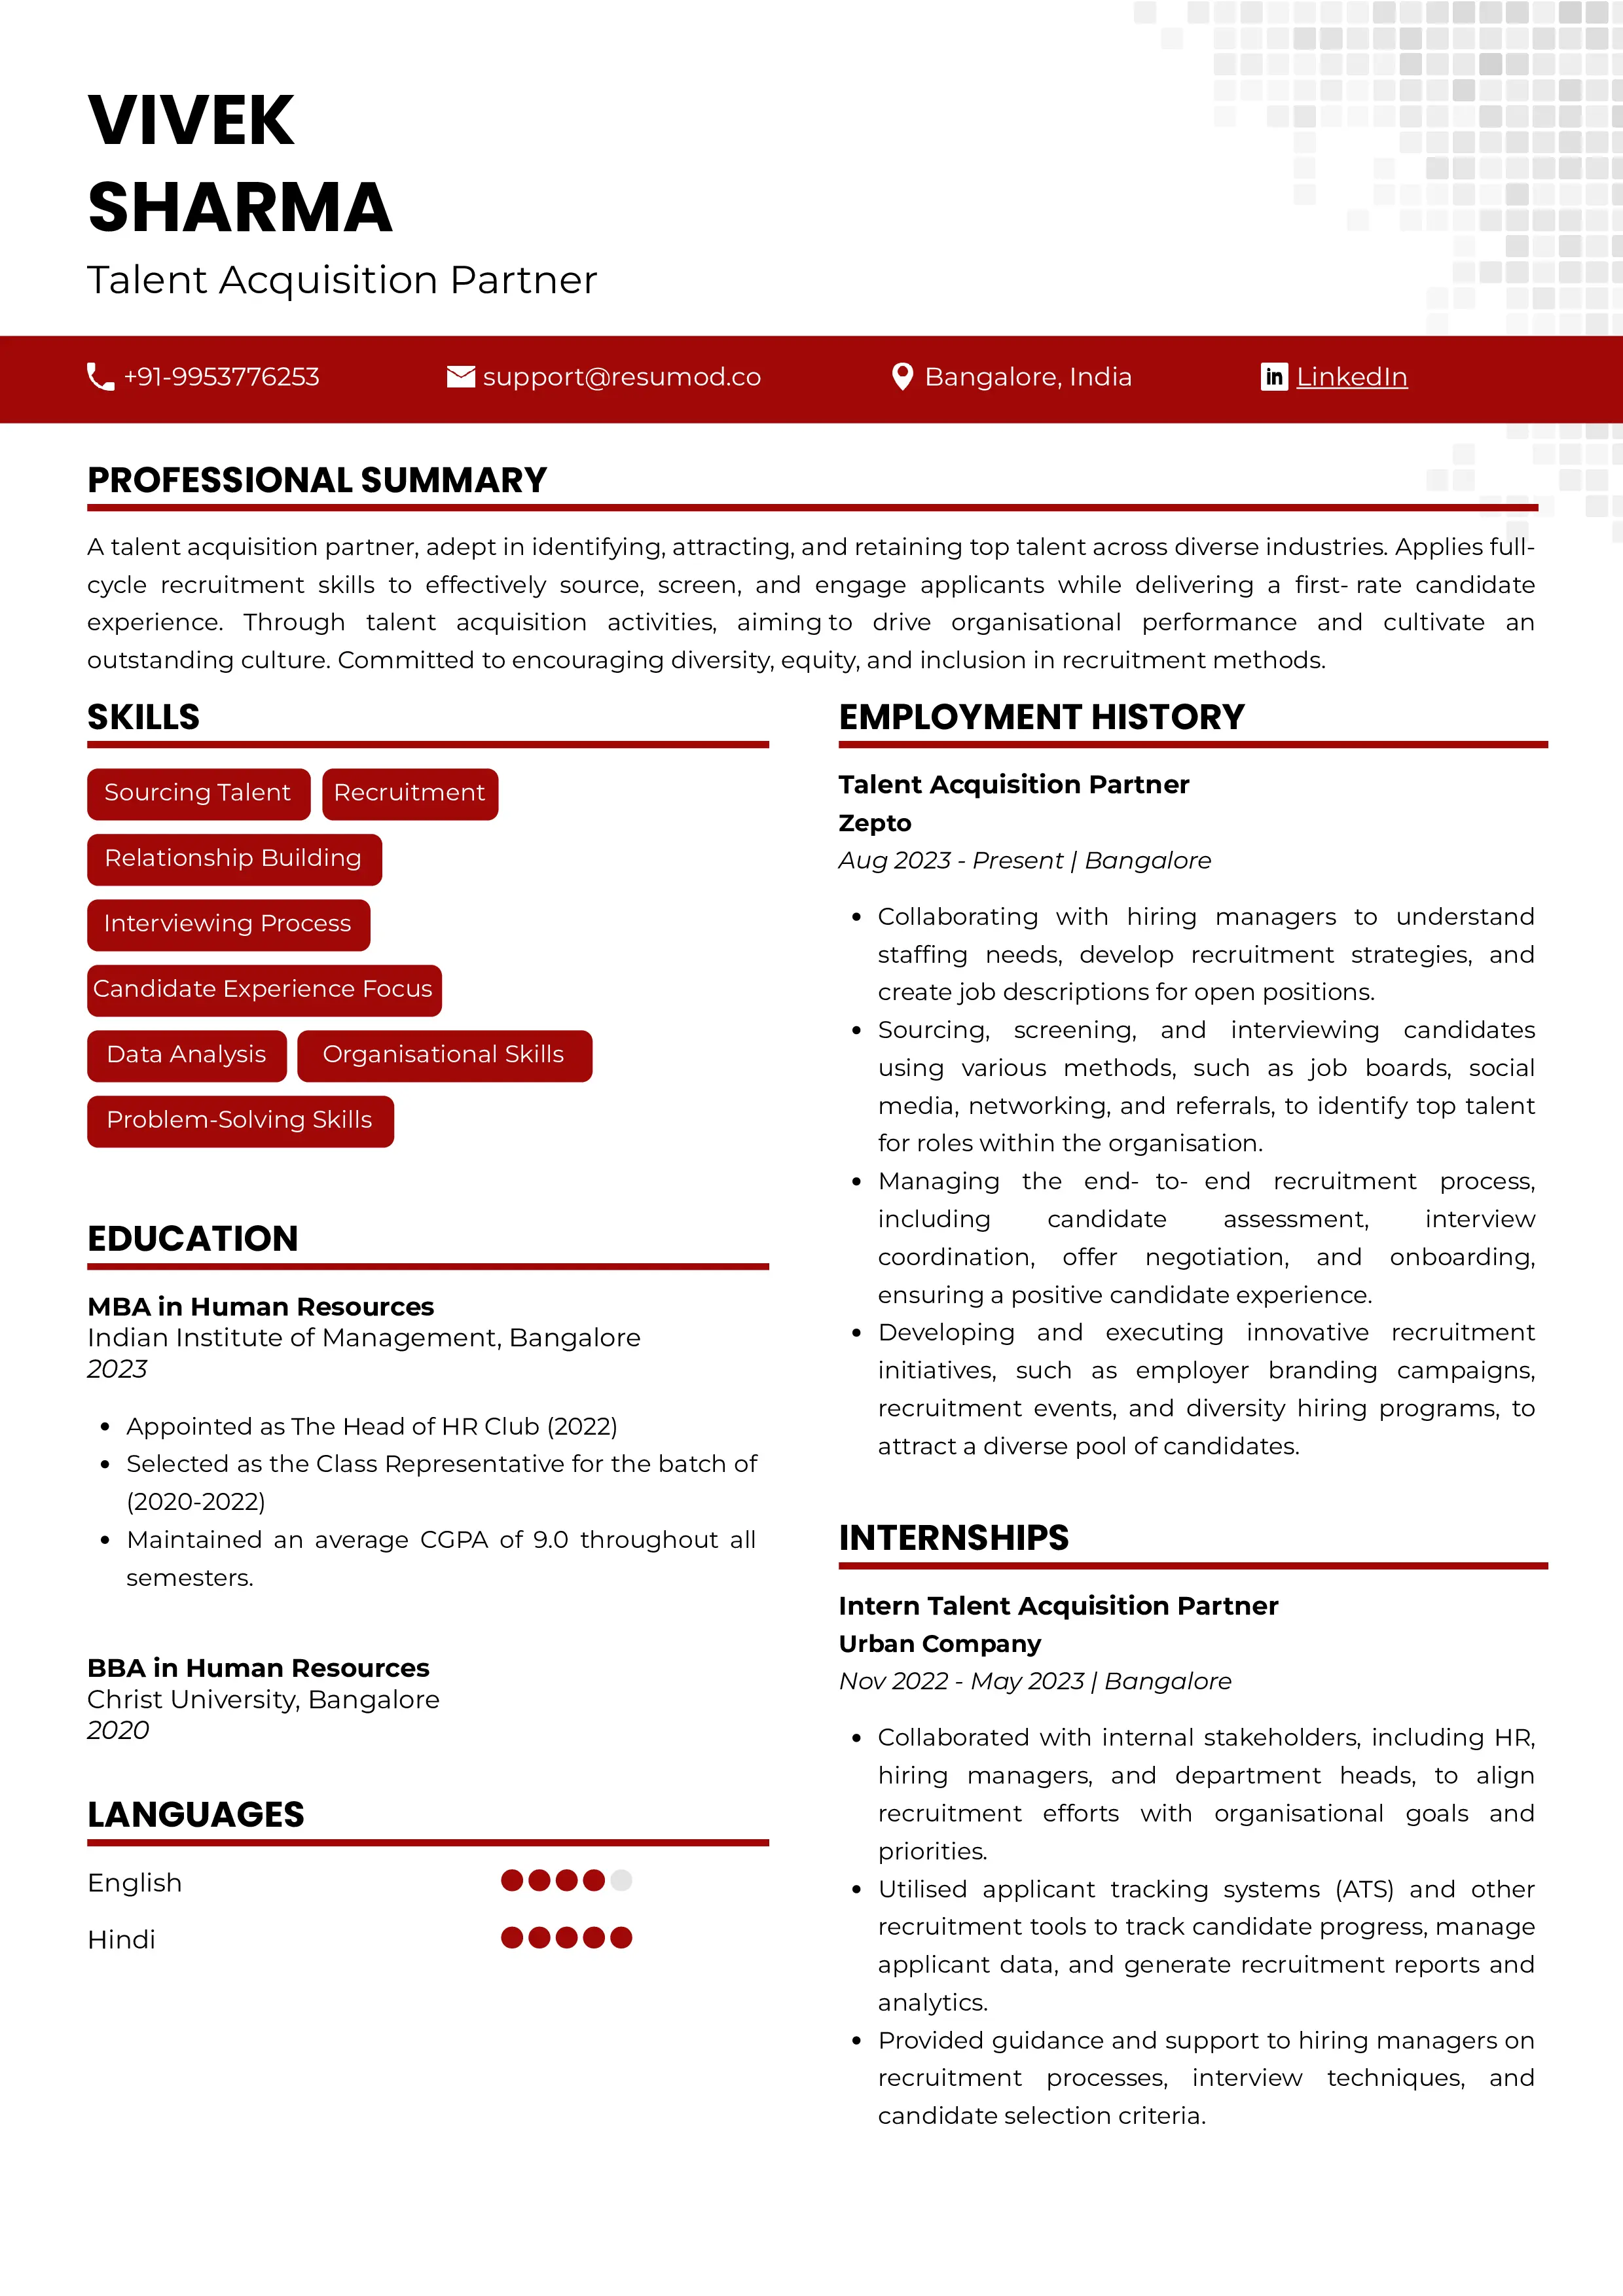 Sample Resume of Talent Acquisition Partner | Free Resume Templates & Samples on Resumod.co